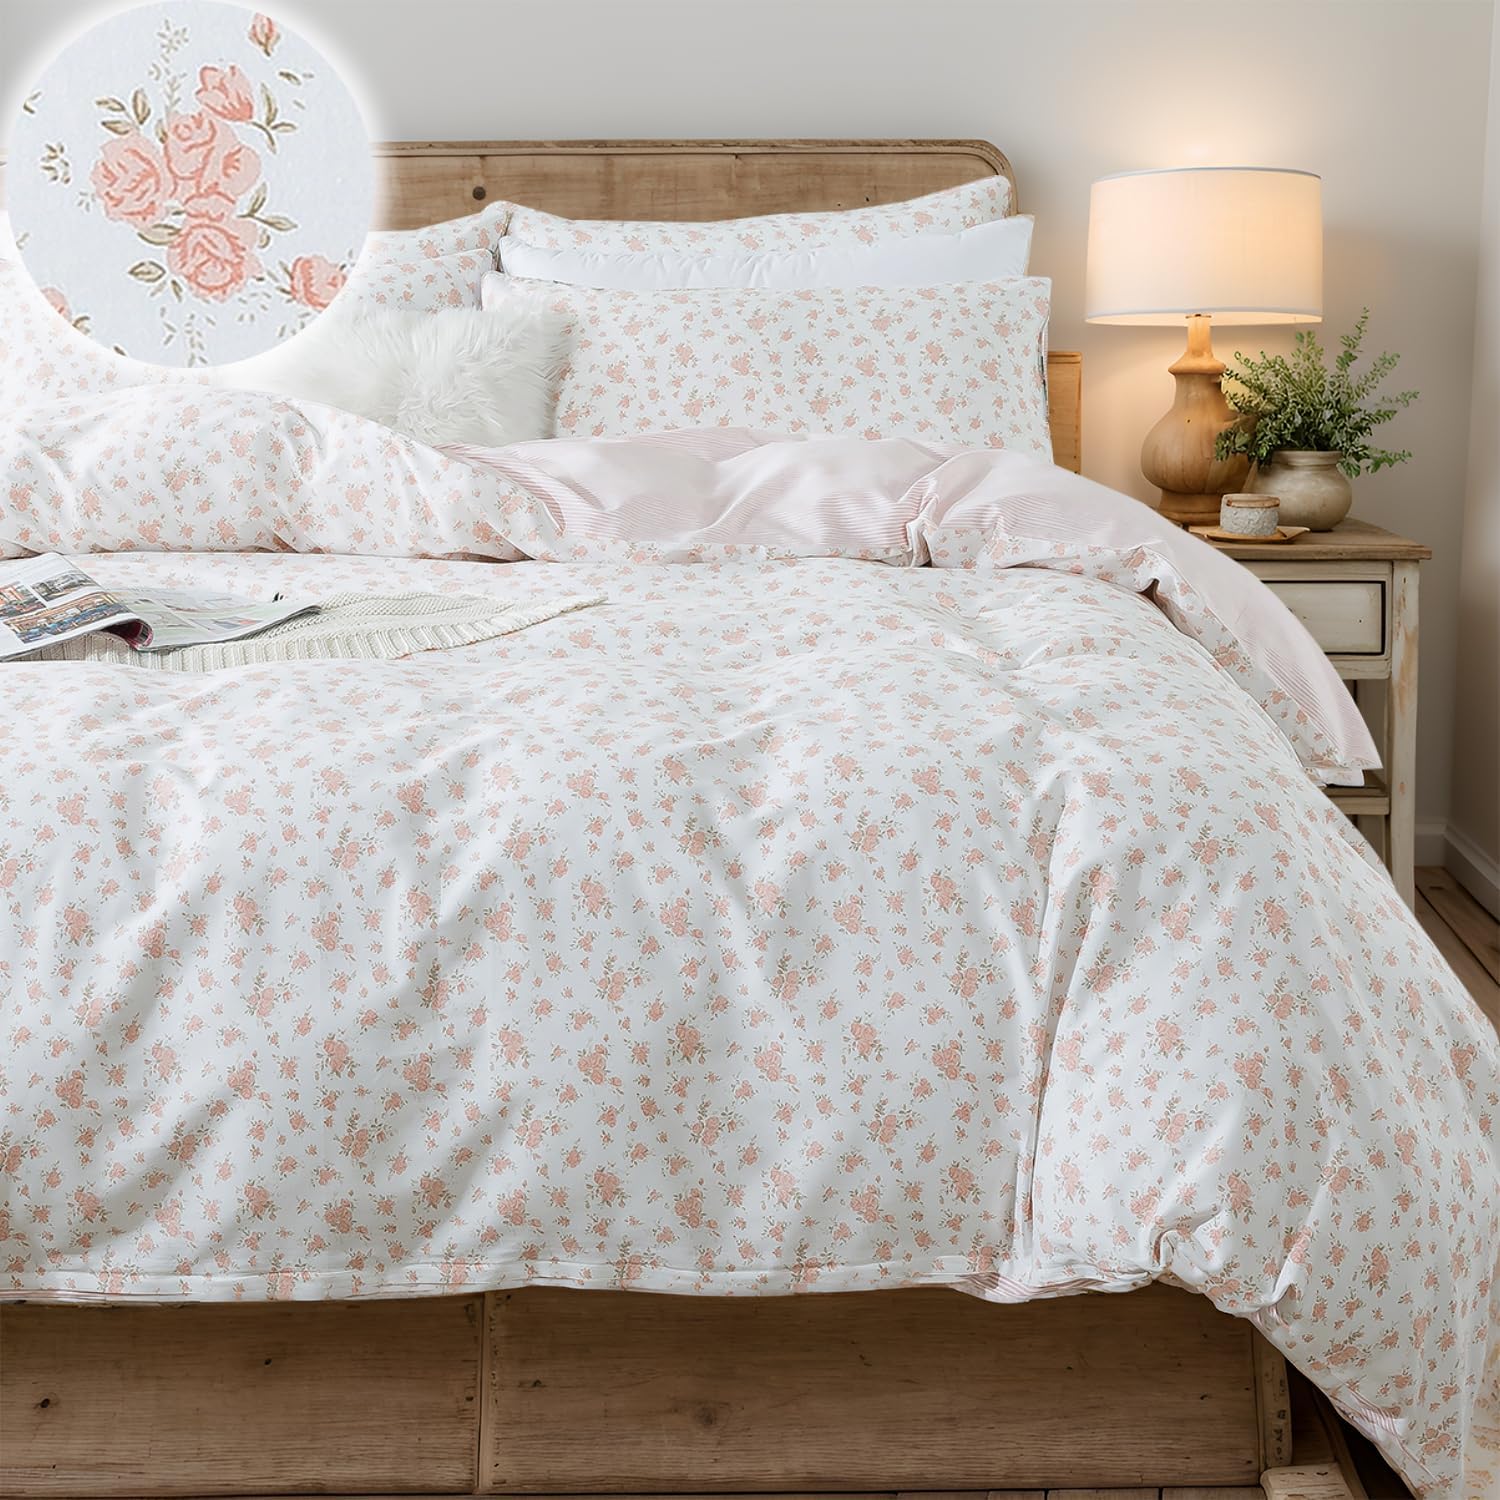 FADFAY Queen Duvet Cover Set Pink Floral Comforter Cover 100% Cotton Girls Pink White Flower Bedding Garden Style Blush Bedding for All Season Soft Bedding with 2 Pillowcases, Queen